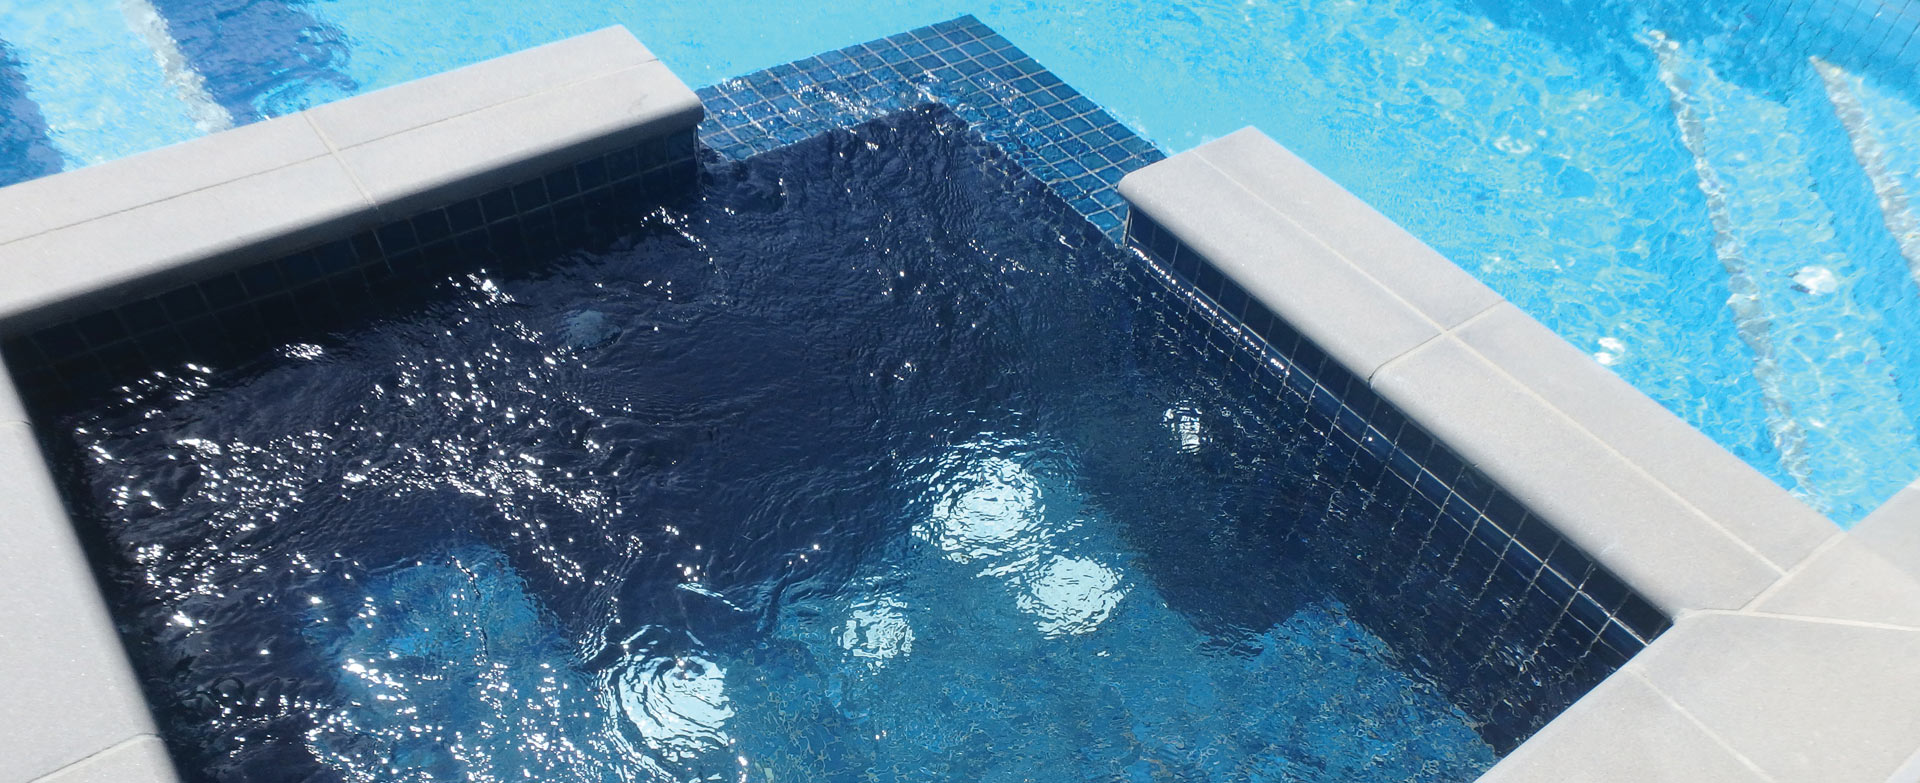 <h1>Pool Renovation</h1><p>Does your concrete swimming pool need renovations, repair or resurfacing? <br />Delorenzo pools offer expert advice and can handle all your pools needs for renovation.</p><a href='services.html'>Learn More</a>